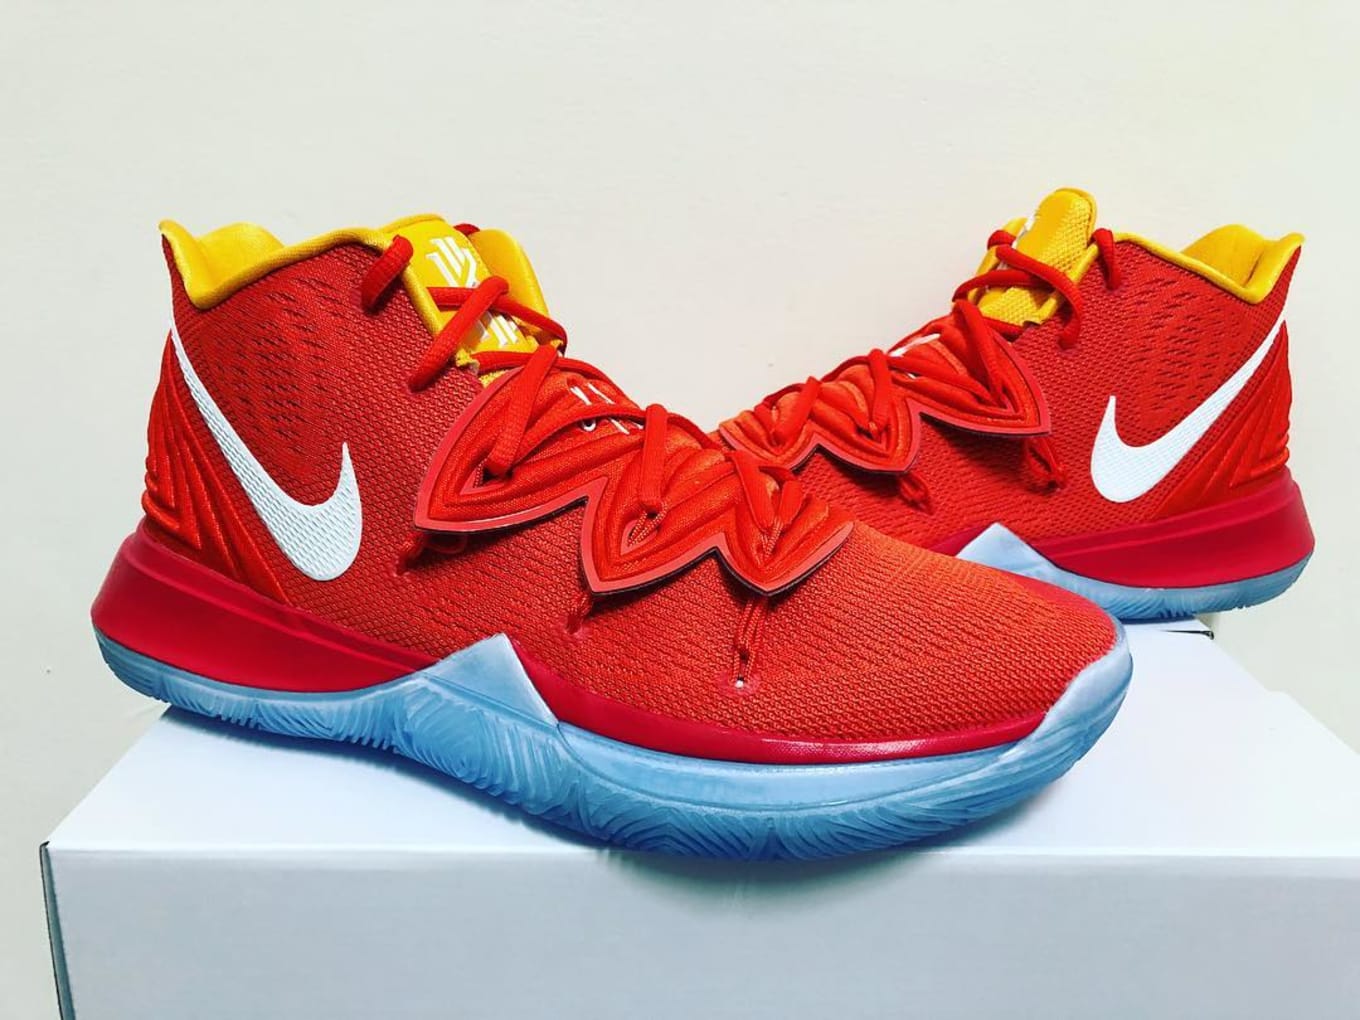 kyrie 5 make your own